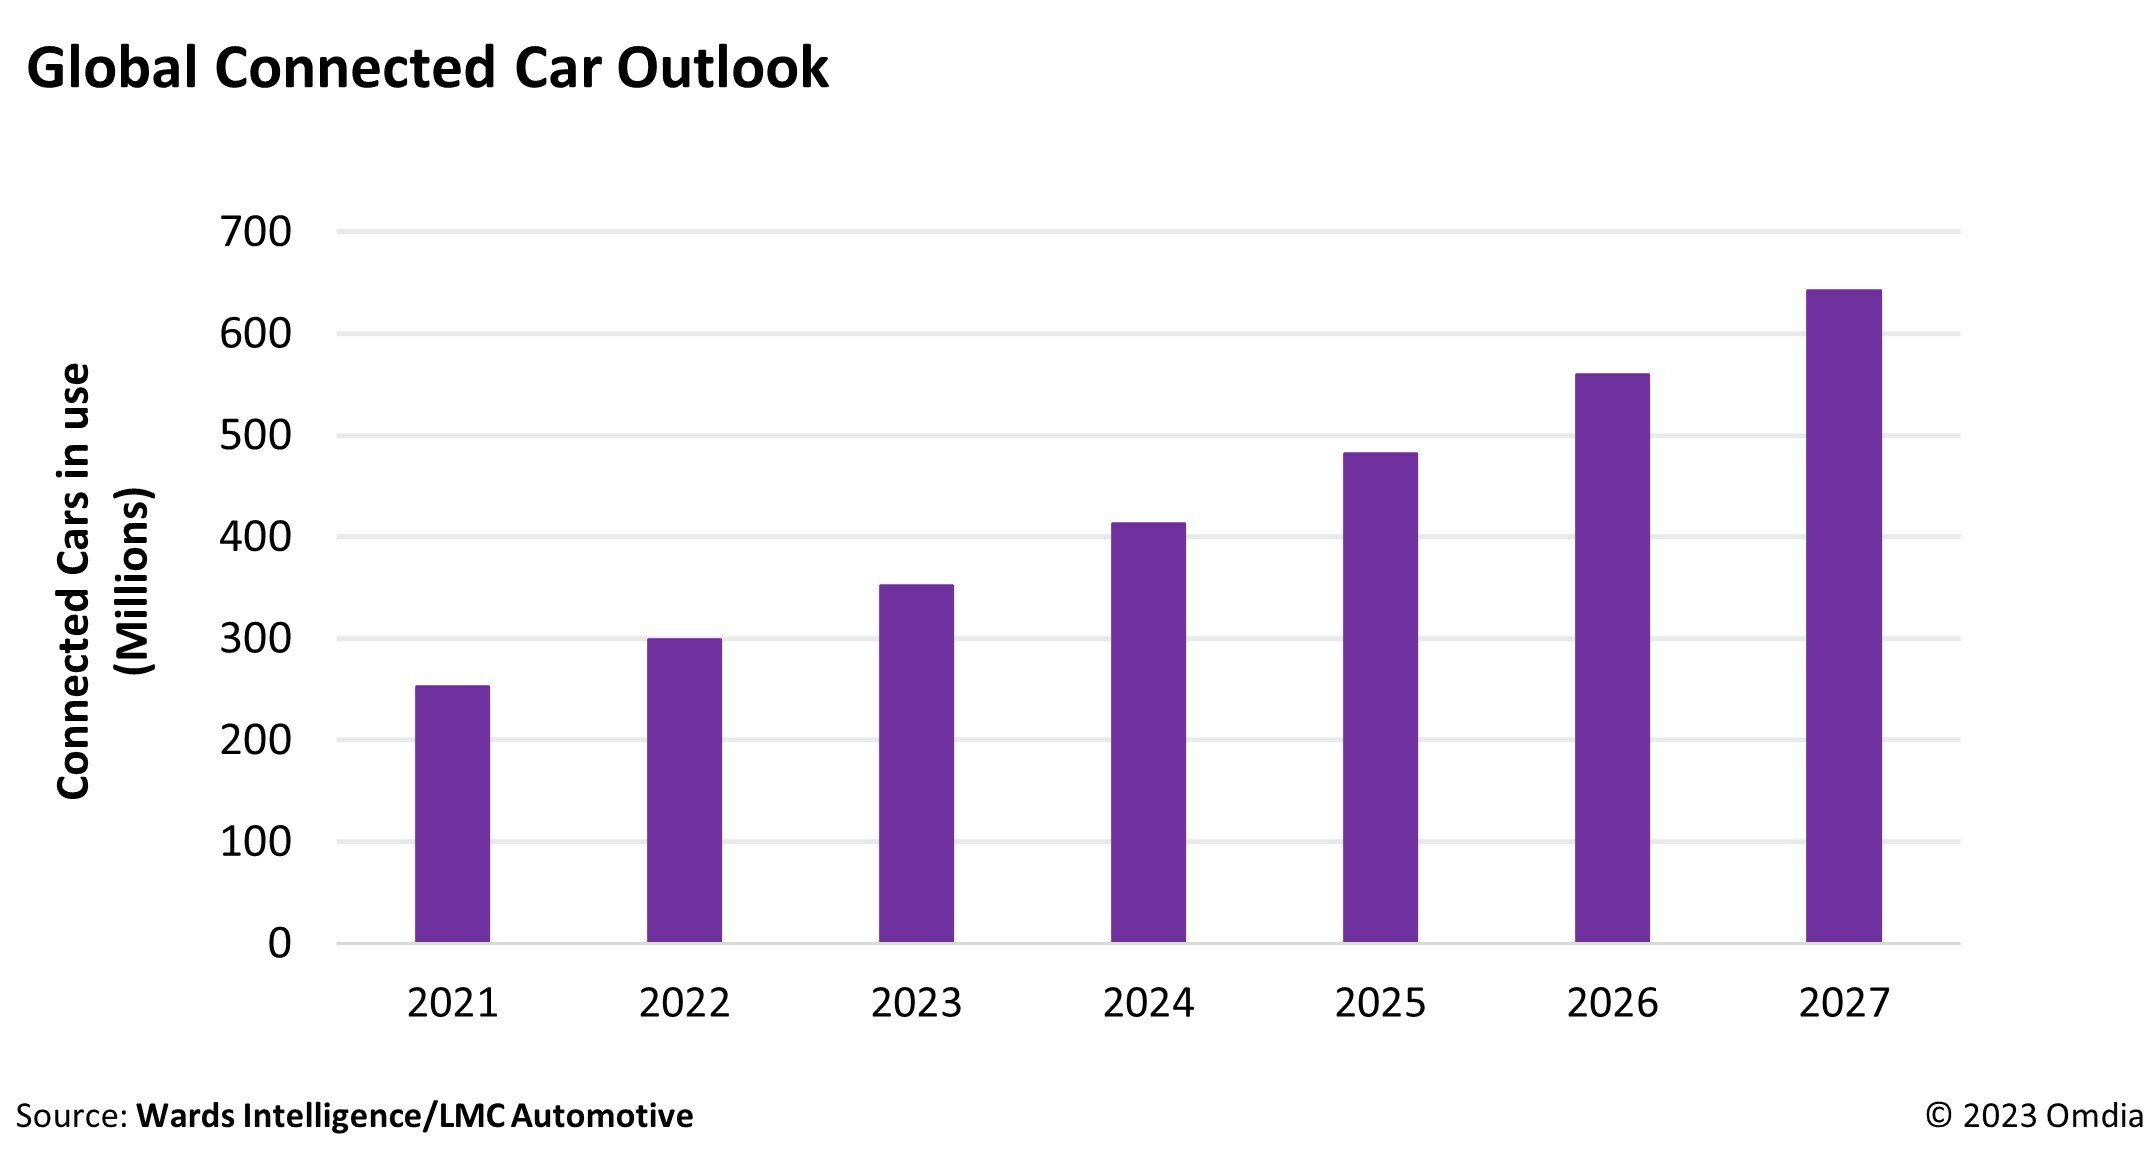 Global Connected Car Outlook - 2021-2027